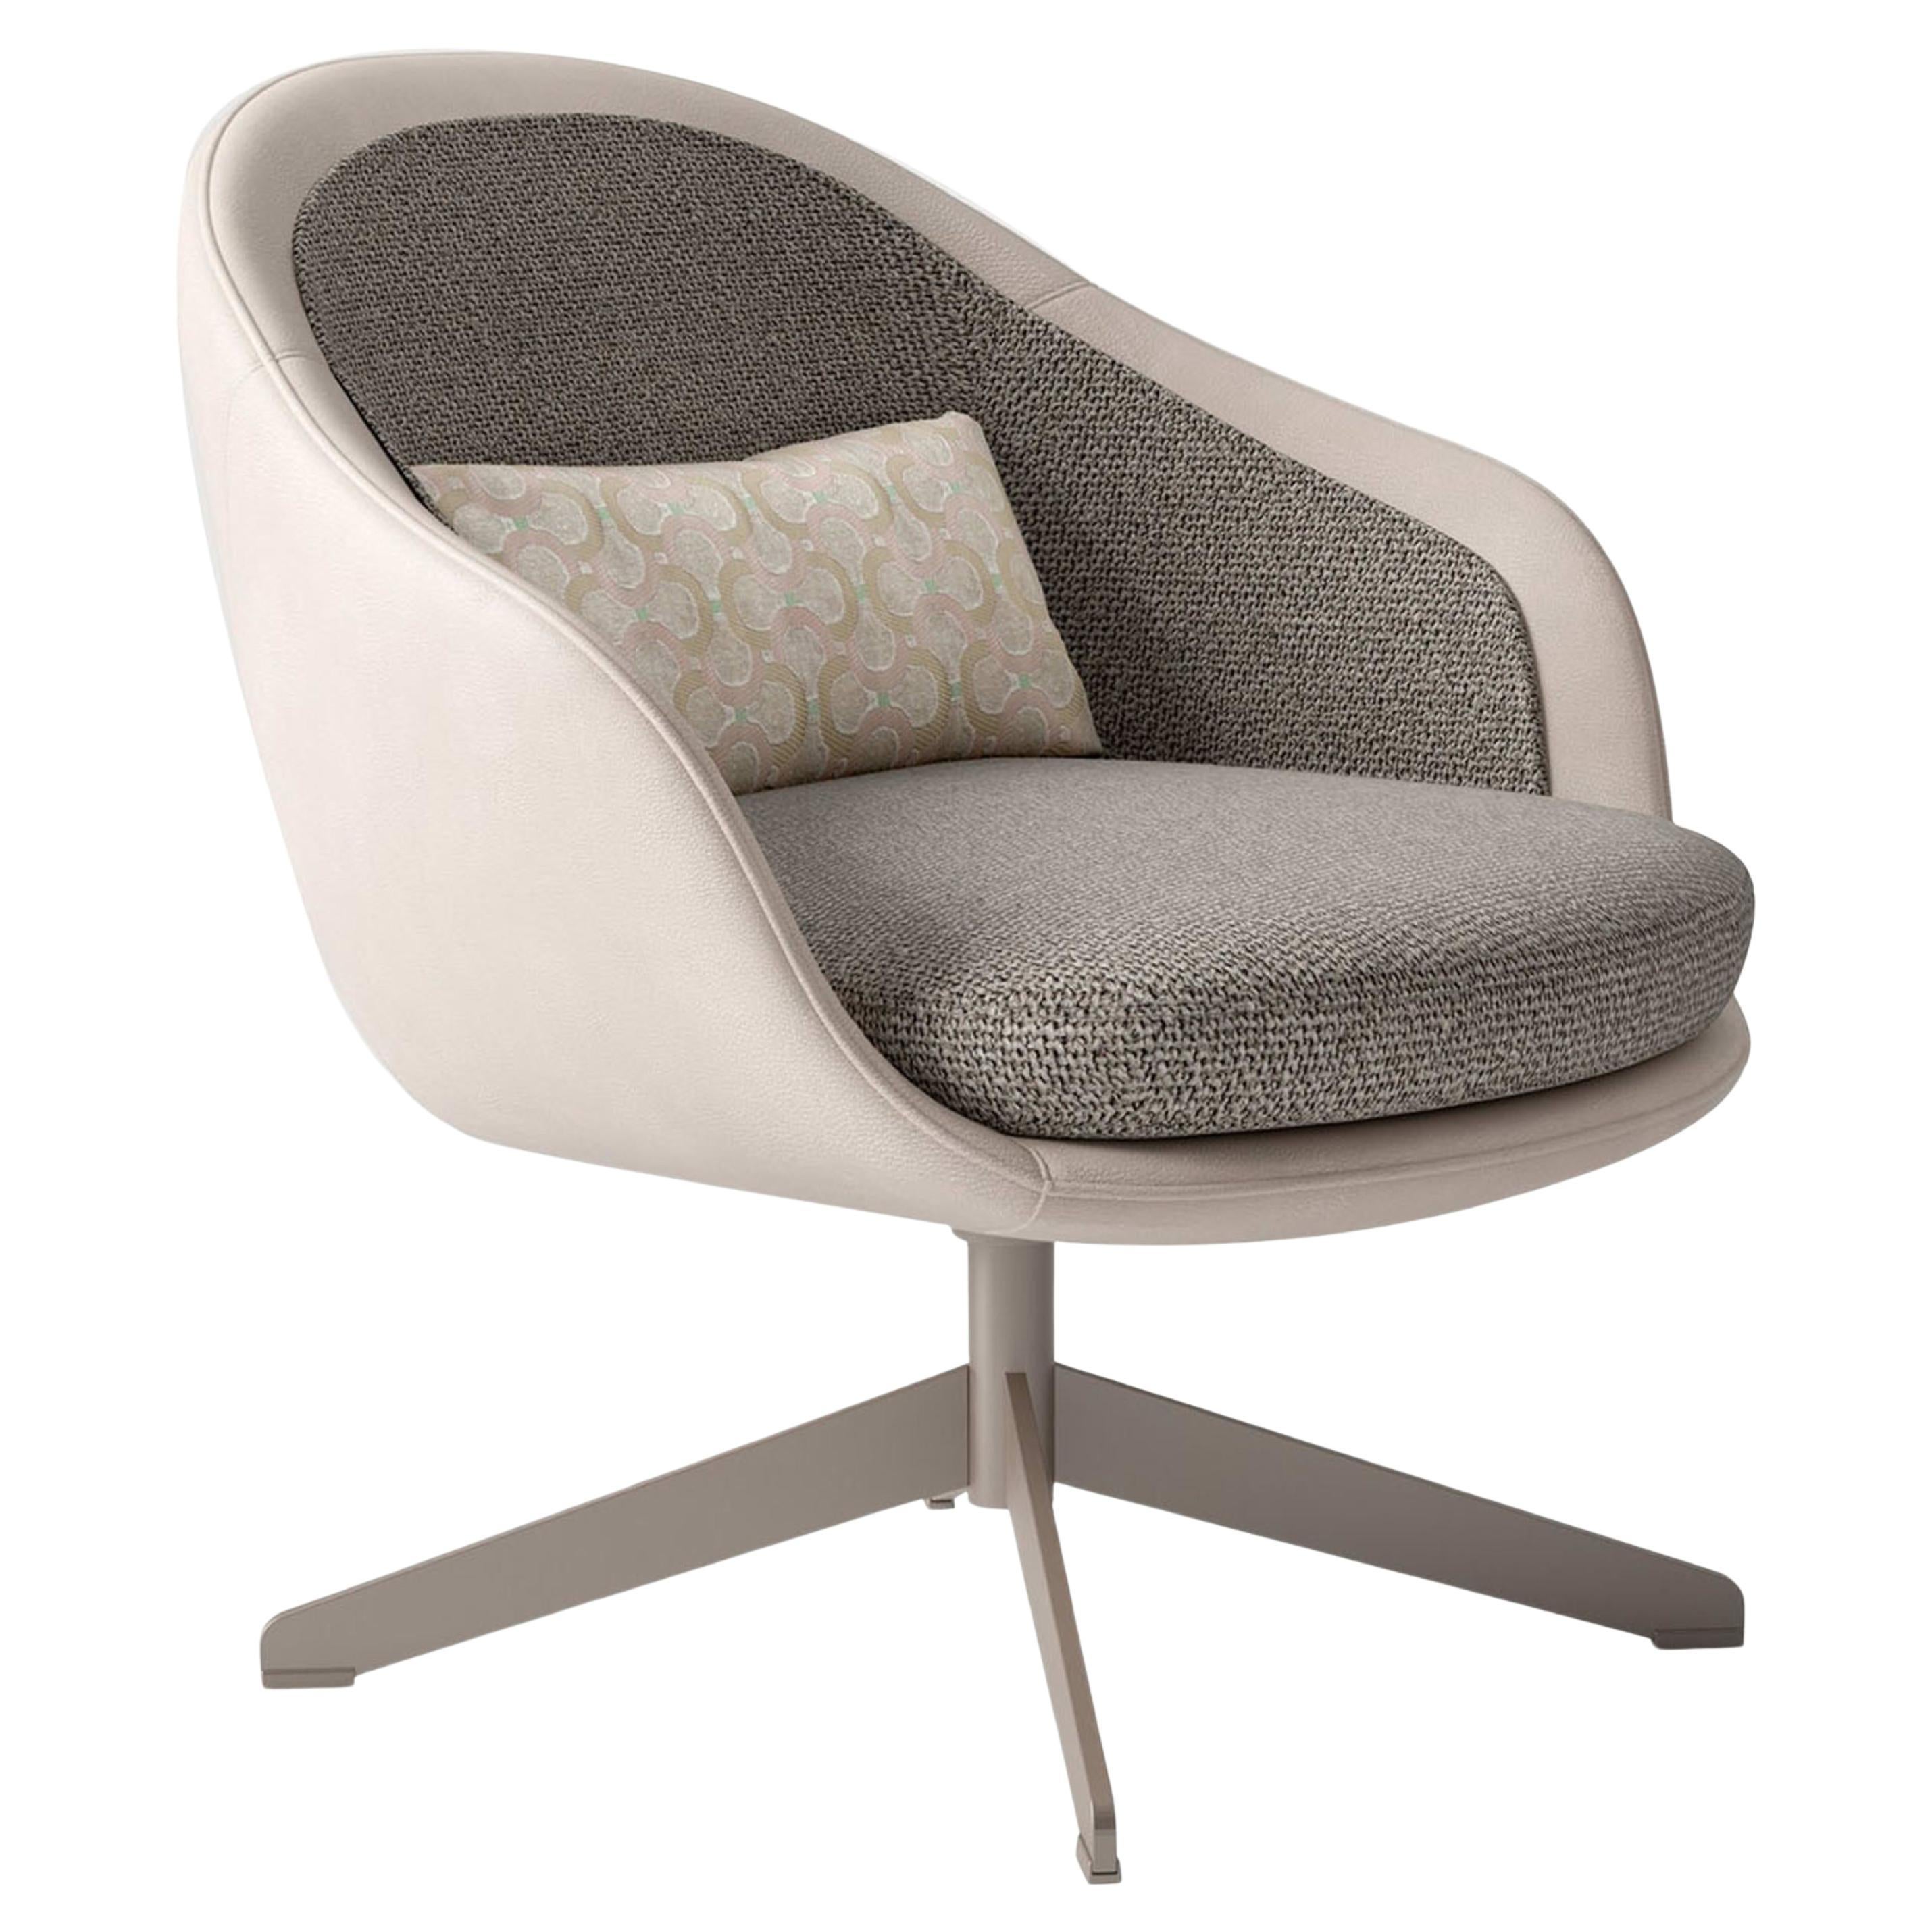 Gray Swivel Chair For Sale